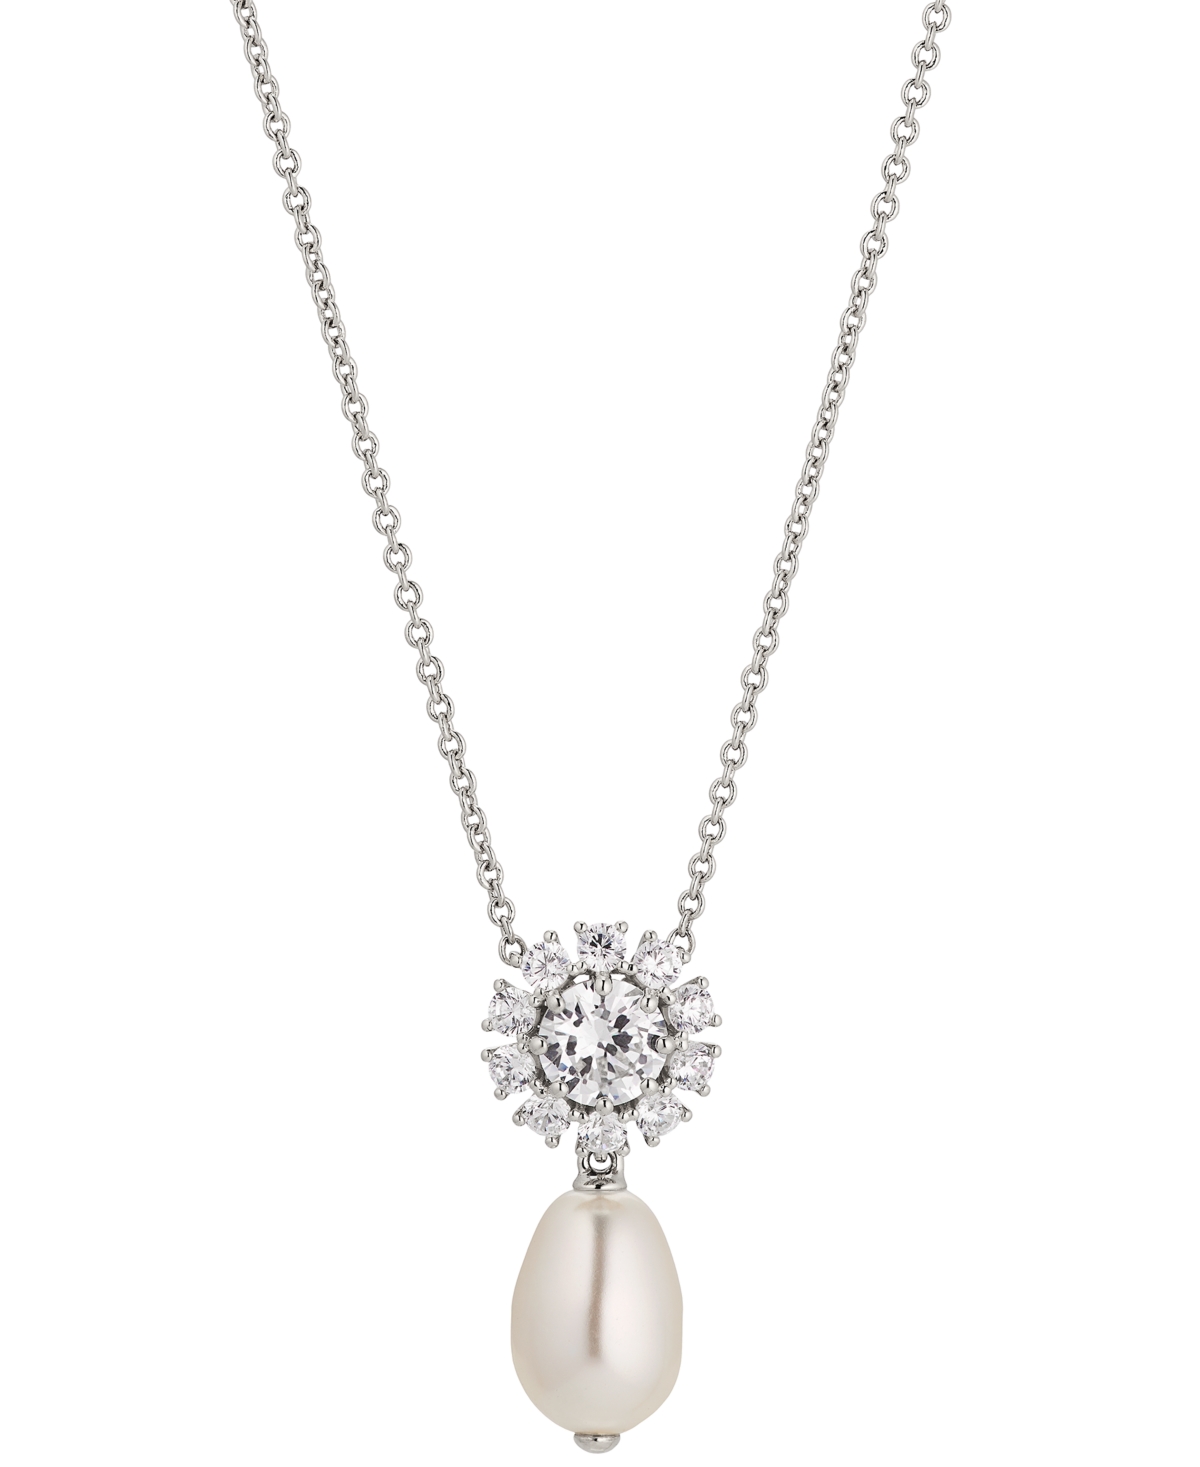 Rhodium-Plated Cubic Zirconia Flower & Imitation Pearl Pendant Necklace, 16" + 2" extender, Created for Macy's - Rhodium